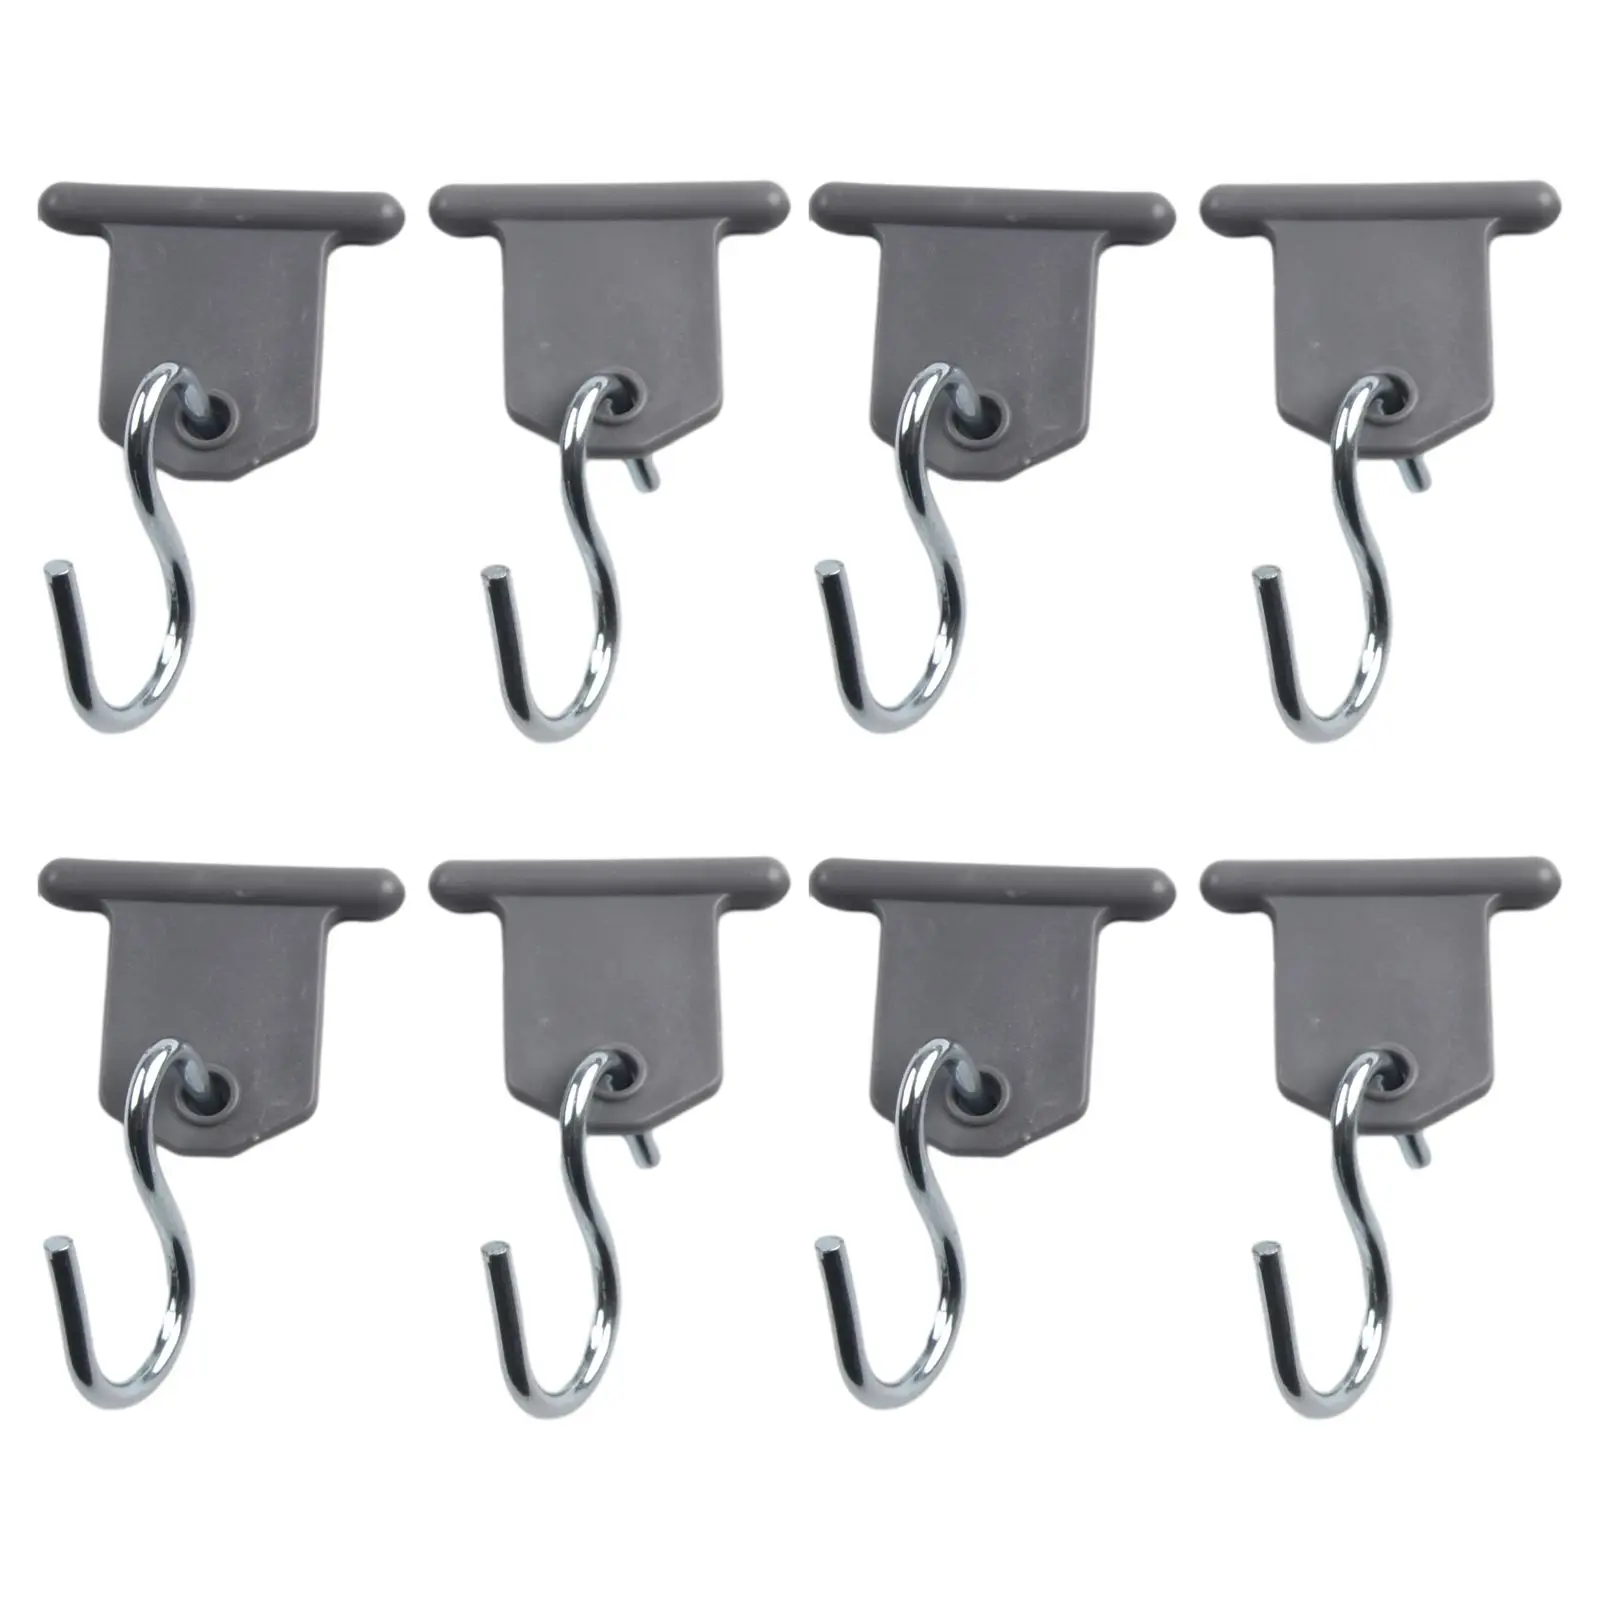 8pcs waterproof mini led city color ip65 outdoor 24 15w rgbwa 5 in1 led wall washer light 8PCS Camping Awning Hooks Clips RV Tent Hangers Light Hangers For Caravan Camper Hanging Bath Towels Bathrobes Umbrellas